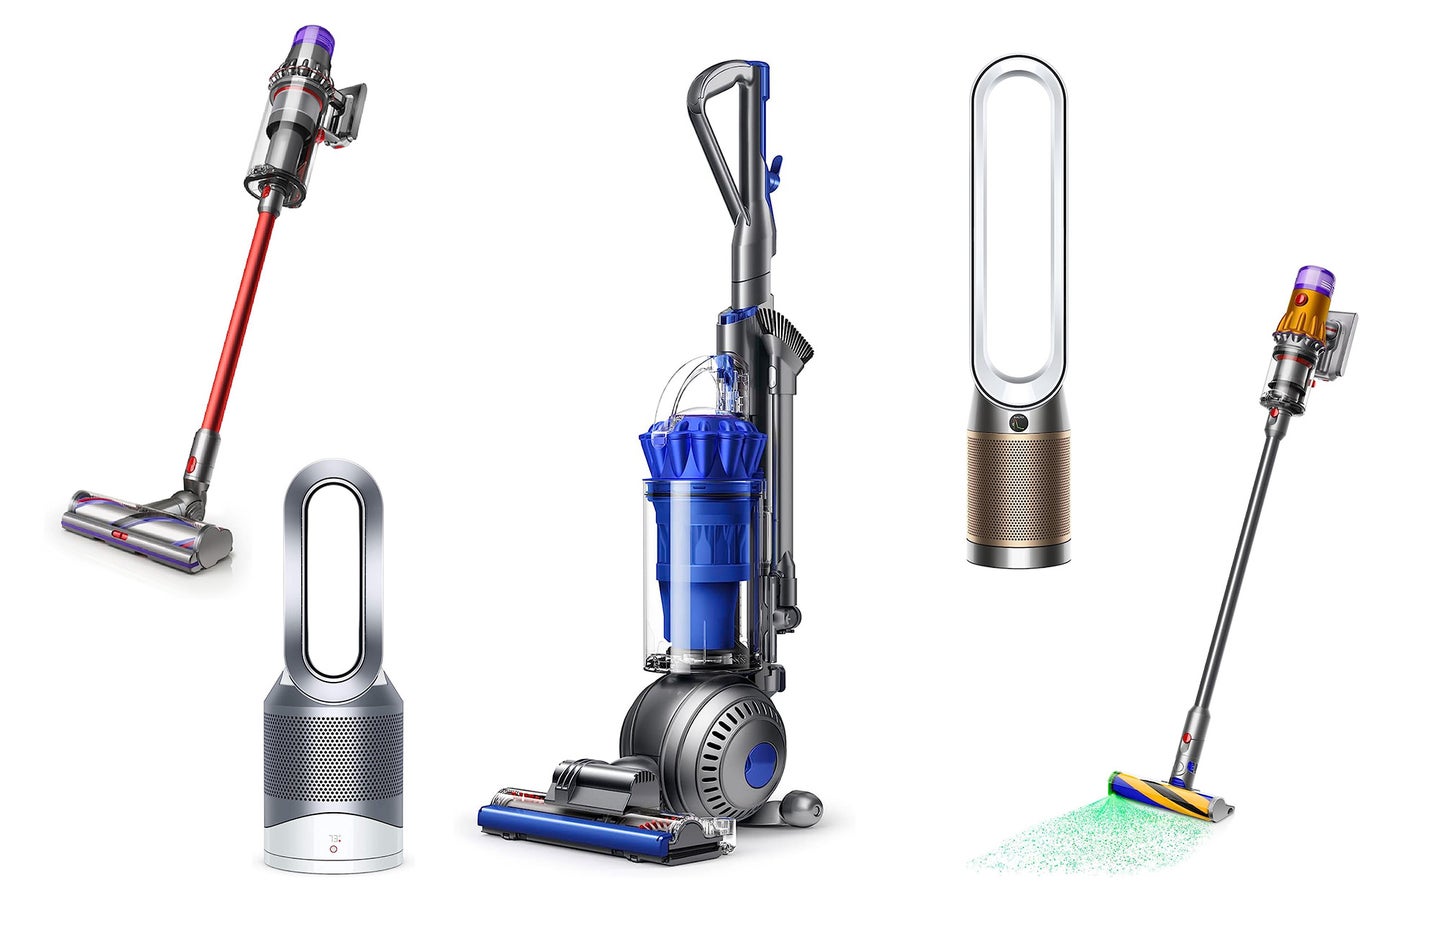 Save hundreds on vacuums and air purifiers from Dyson this Amazon Prime Day.